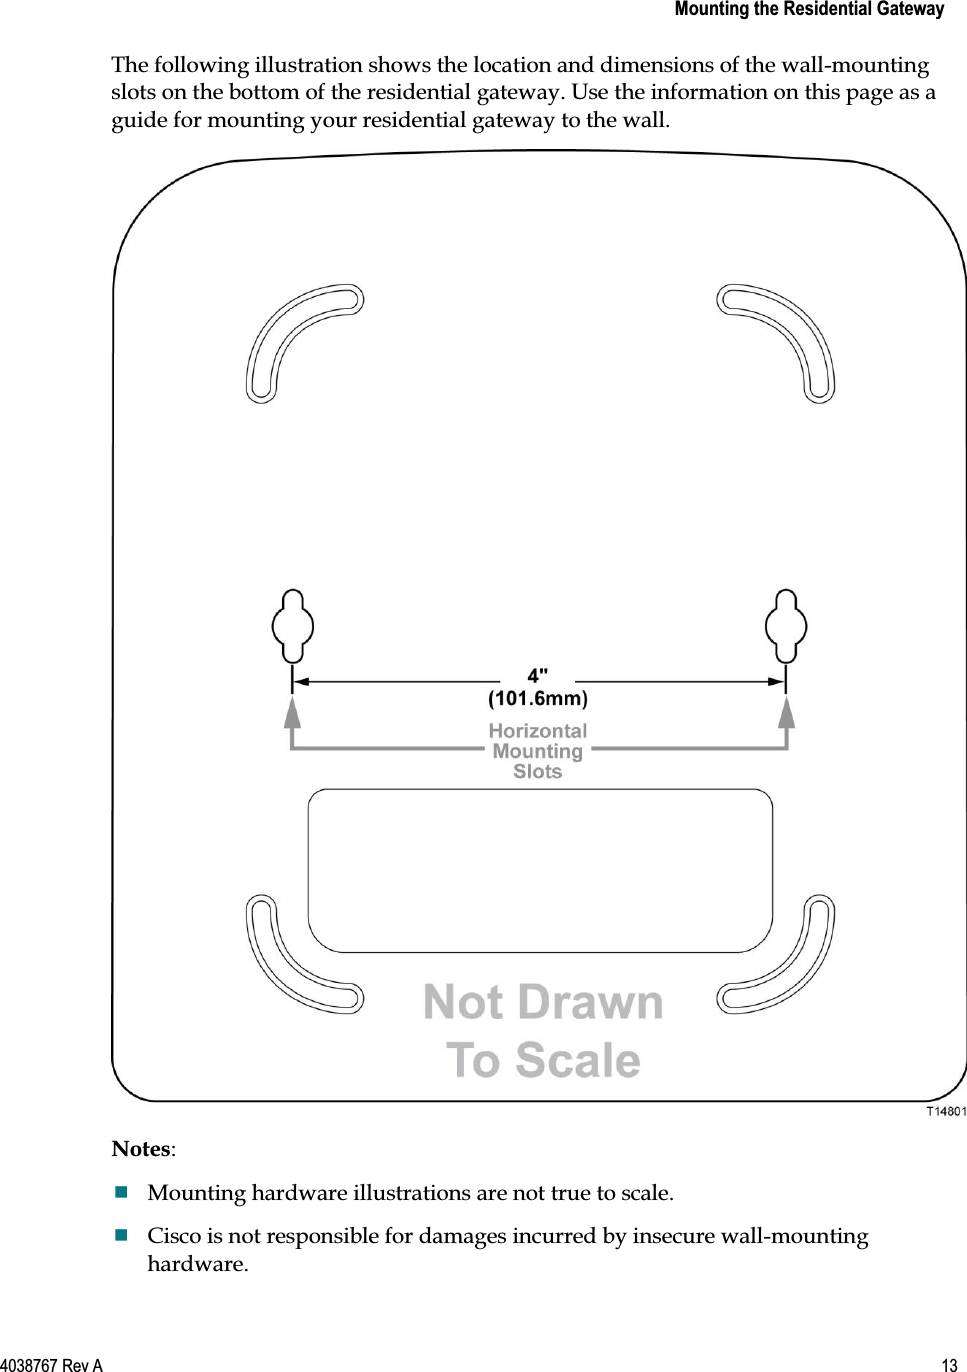    Mounting the Residential Gateway  4038767 Rev A  13  The following illustration shows the location and dimensions of the wall-mounting slots on the bottom of the residential gateway. Use the information on this page as a guide for mounting your residential gateway to the wall.  Notes:  Mounting hardware illustrations are not true to scale.  Cisco is not responsible for damages incurred by insecure wall-mounting hardware. 